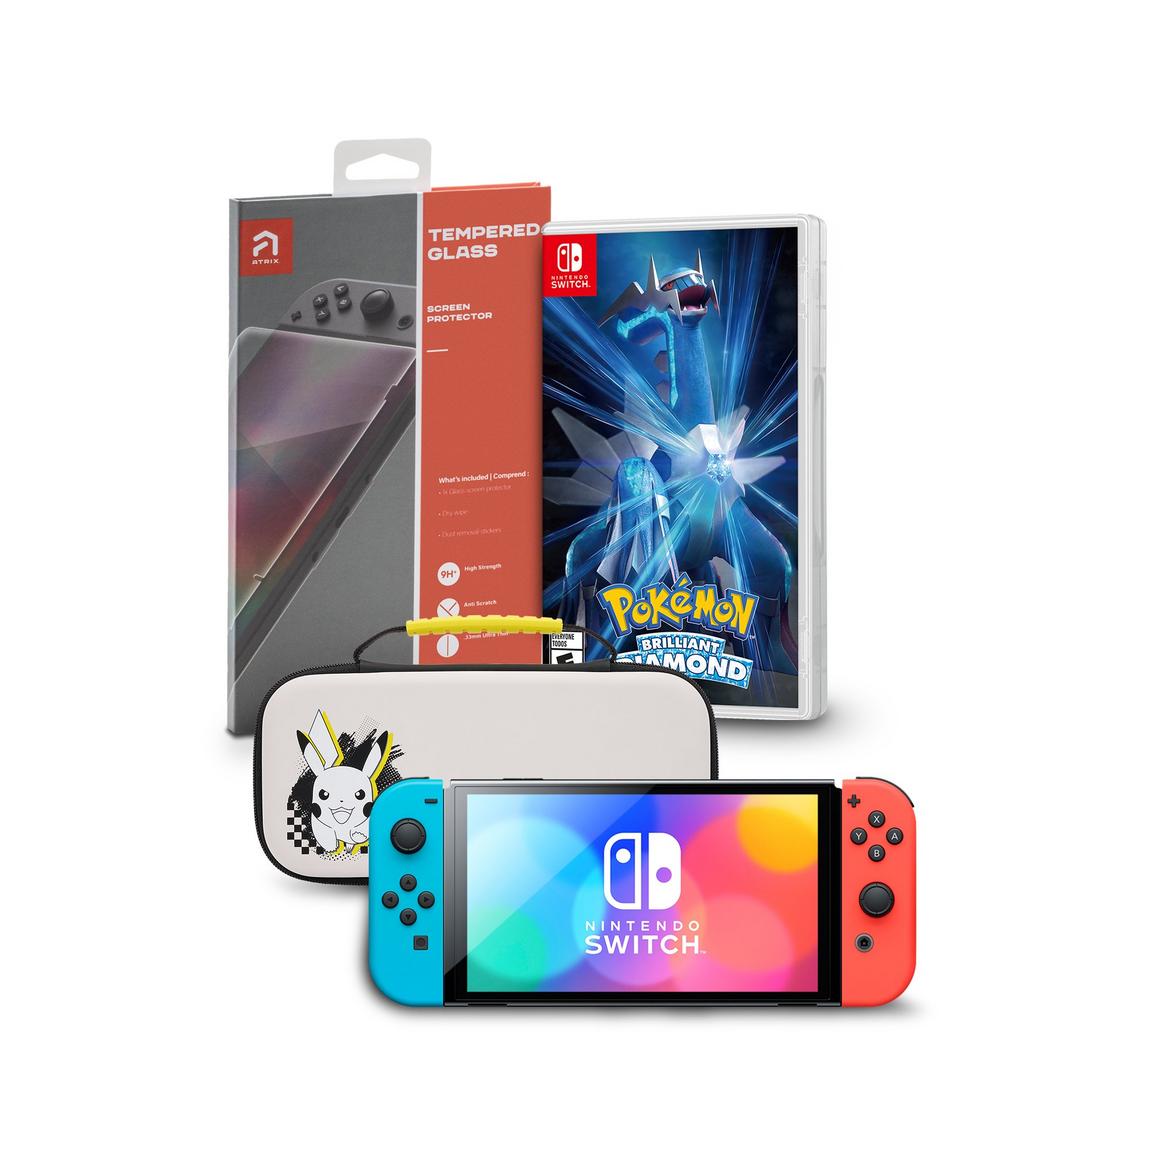 Nintendo Switch OLED Model Console with Neon Red & Neon Blue Joy-Con + Pokemon Brilliant Diamond Game for Nintendo Switch + Atrix Tempered Glass for Nintendo Switch OLED + PowerA Pokemon Pikachu Checks Protection Case for Nintendo Switch